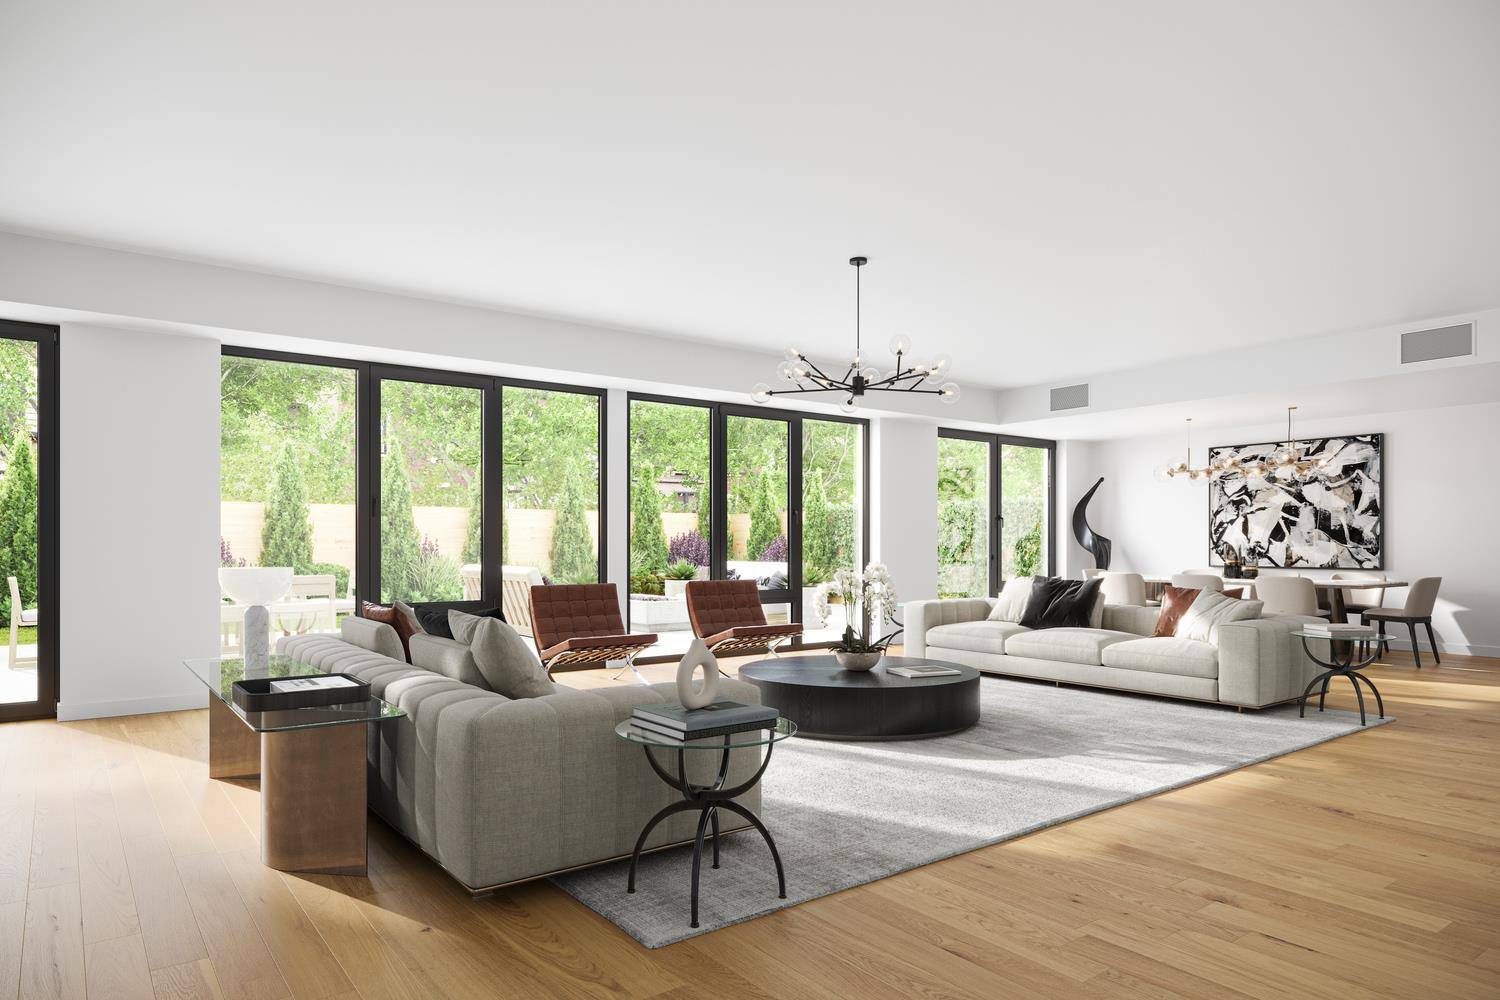 The Sebastian is a limited collection of six light filled residences on West 15th Street, a quiet tree lined street in Chelsea.